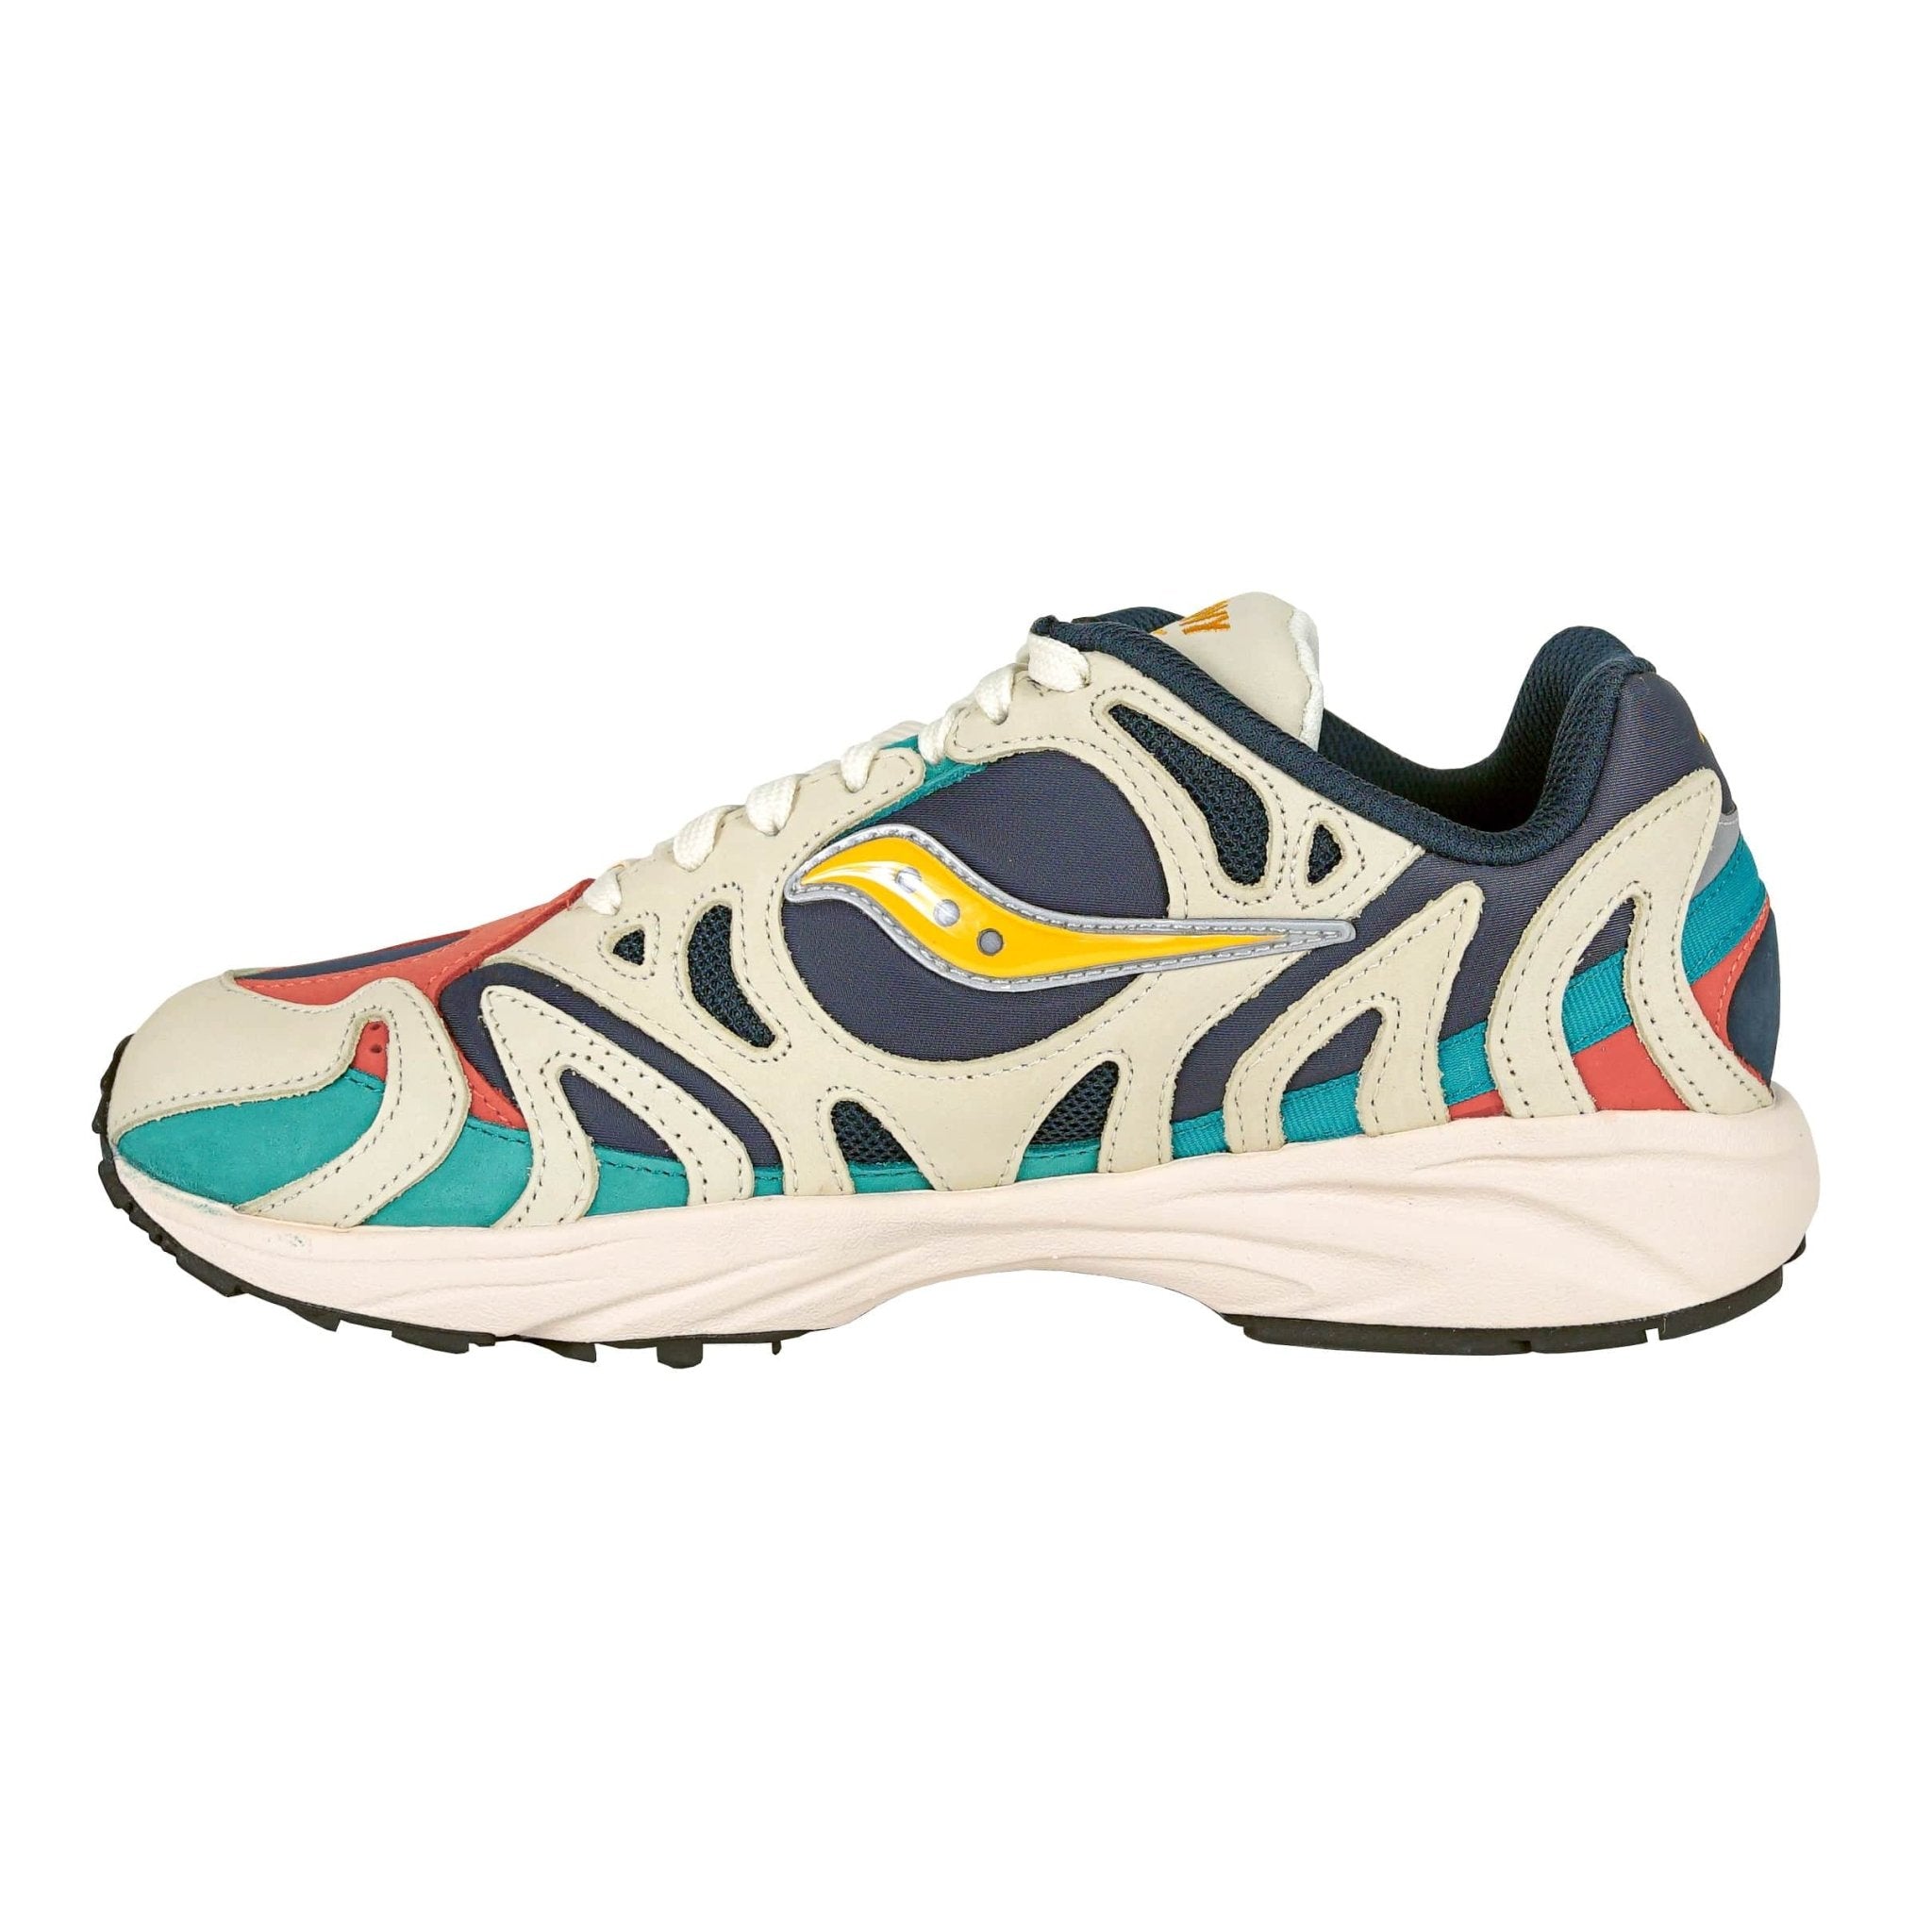 Grid Azura 2000 in white and blue - Saucony - State Of Flux